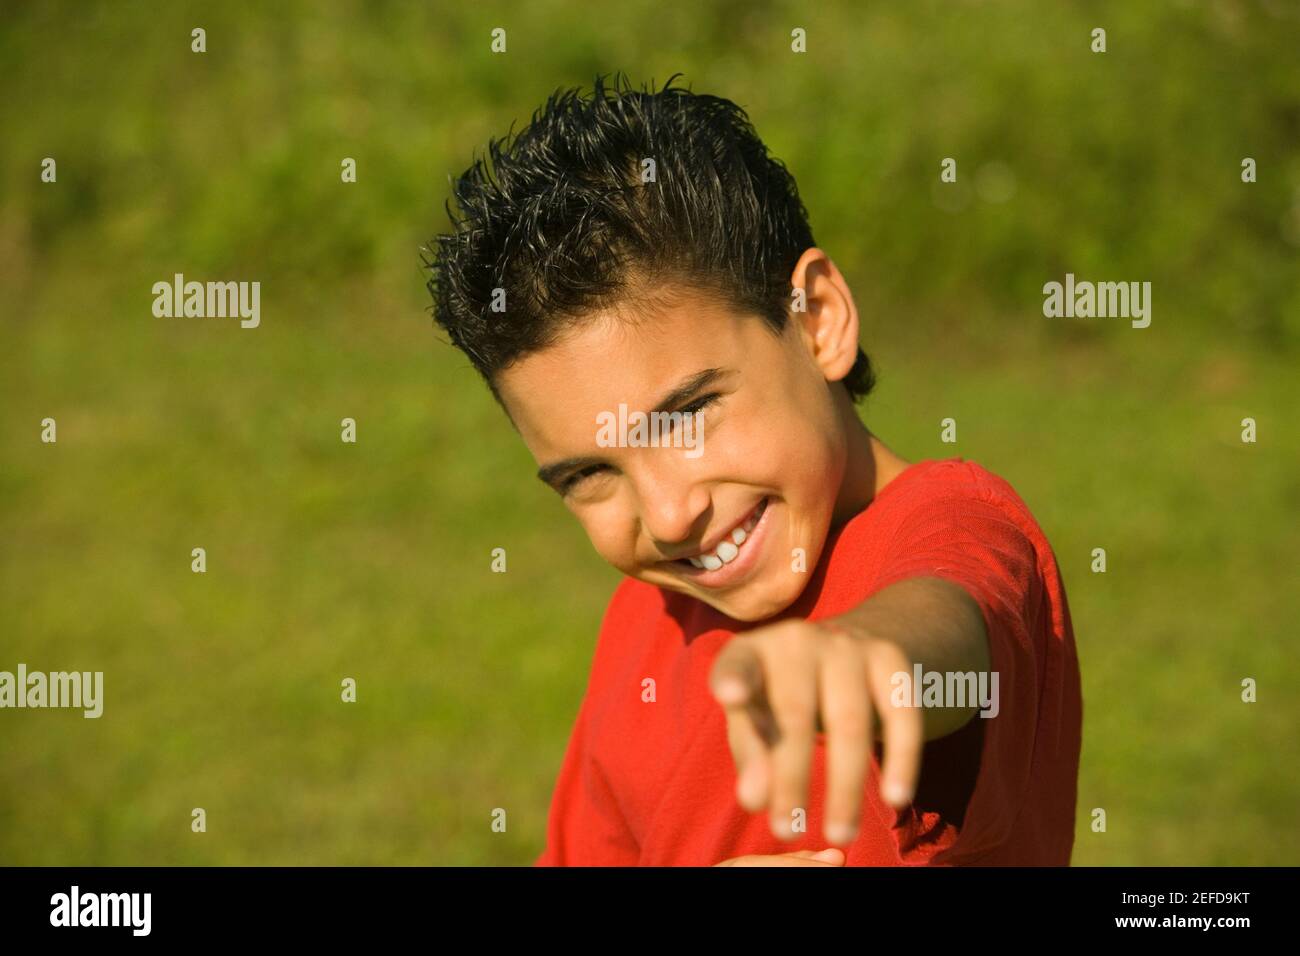 Portrait of a boy pointing forward Stock Photo